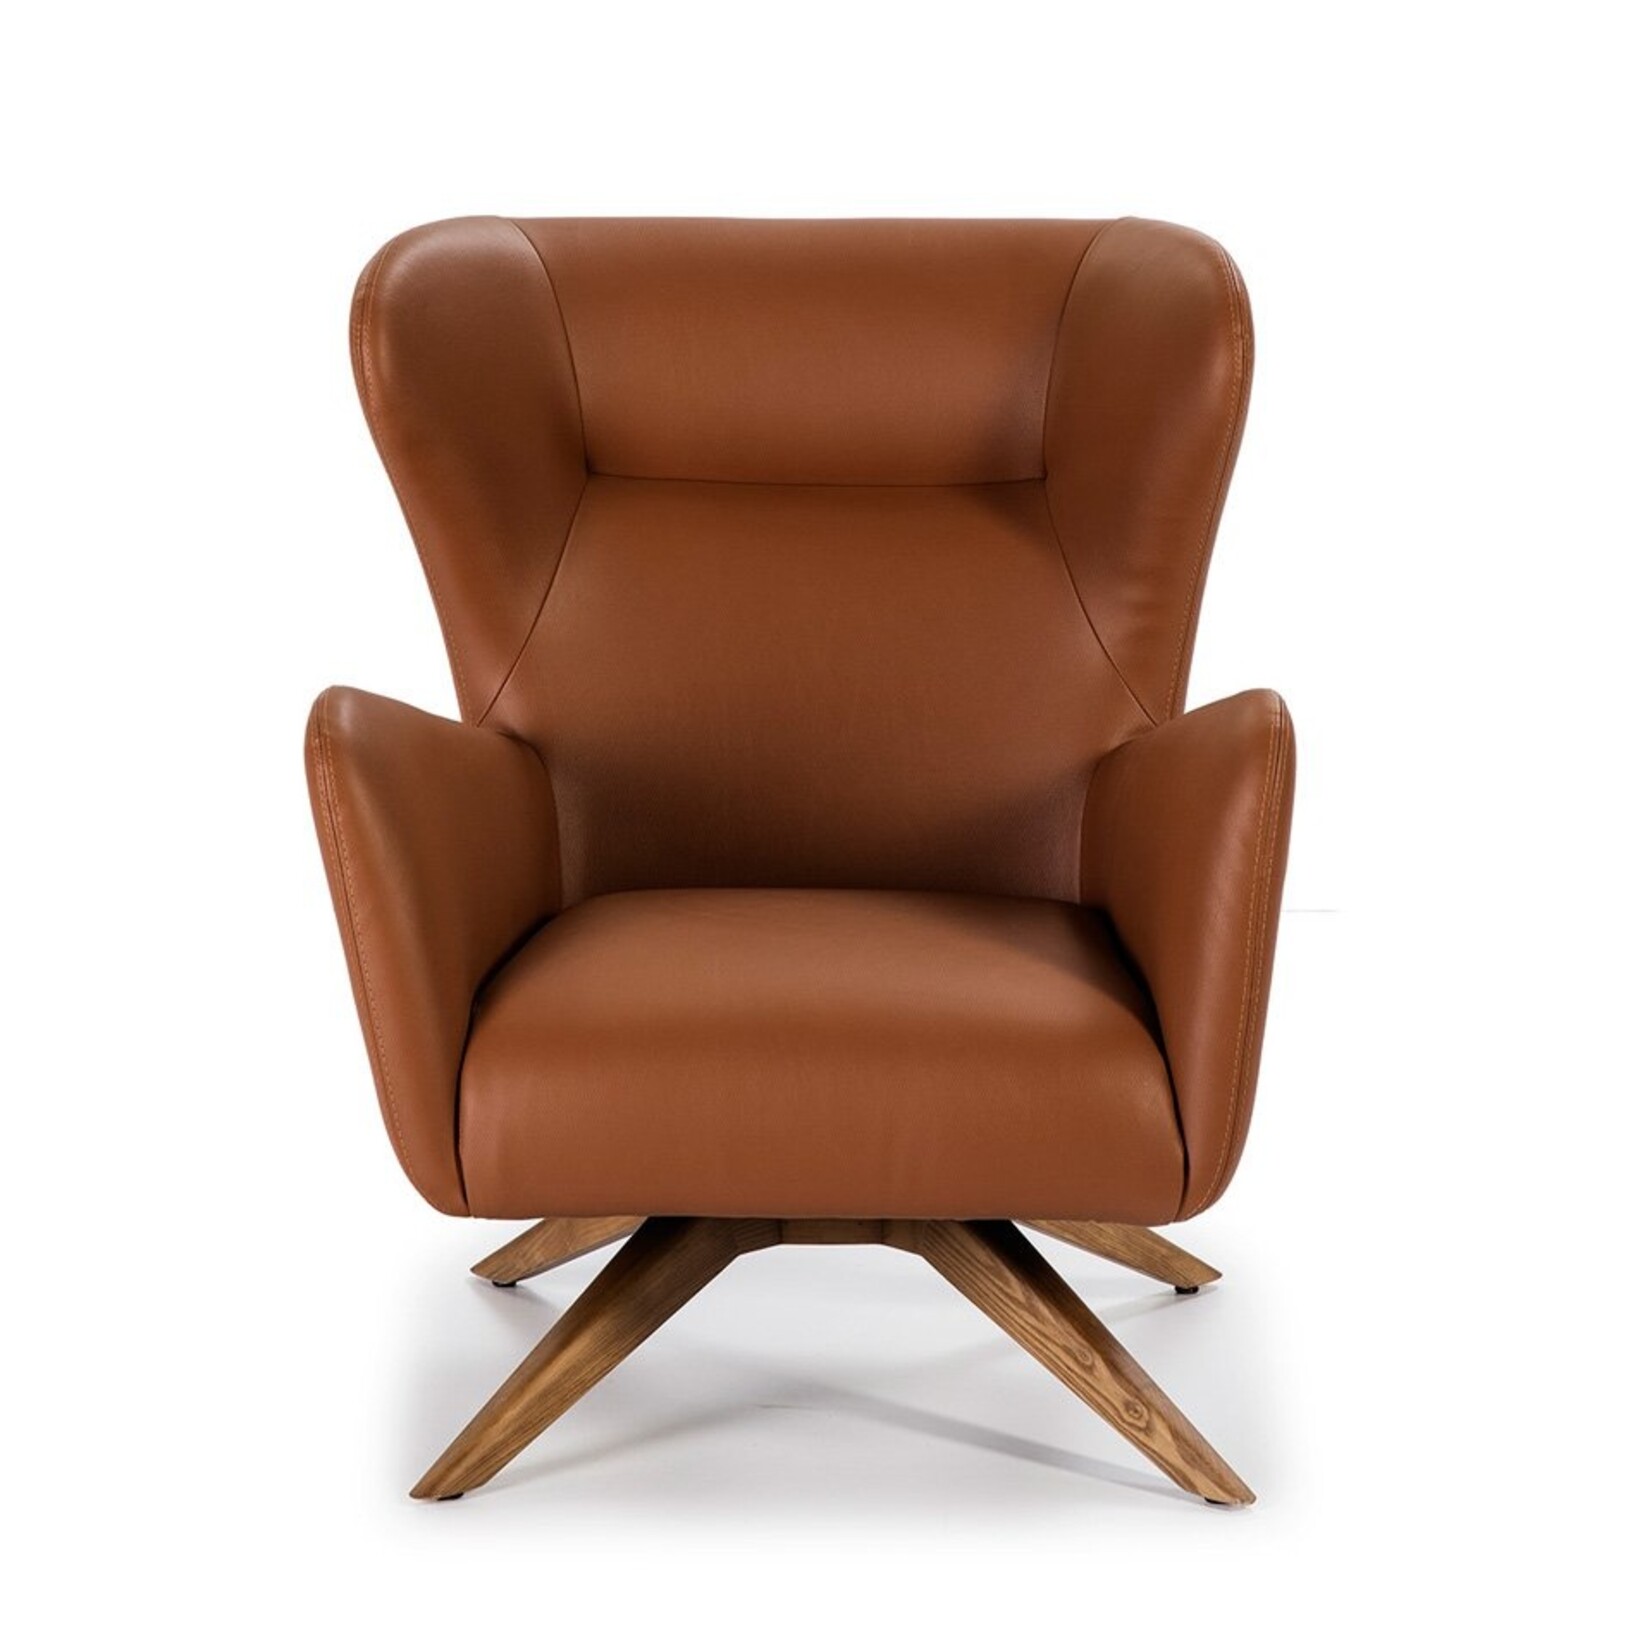 Swivel armchair upholstered in faux leather and walnut legs